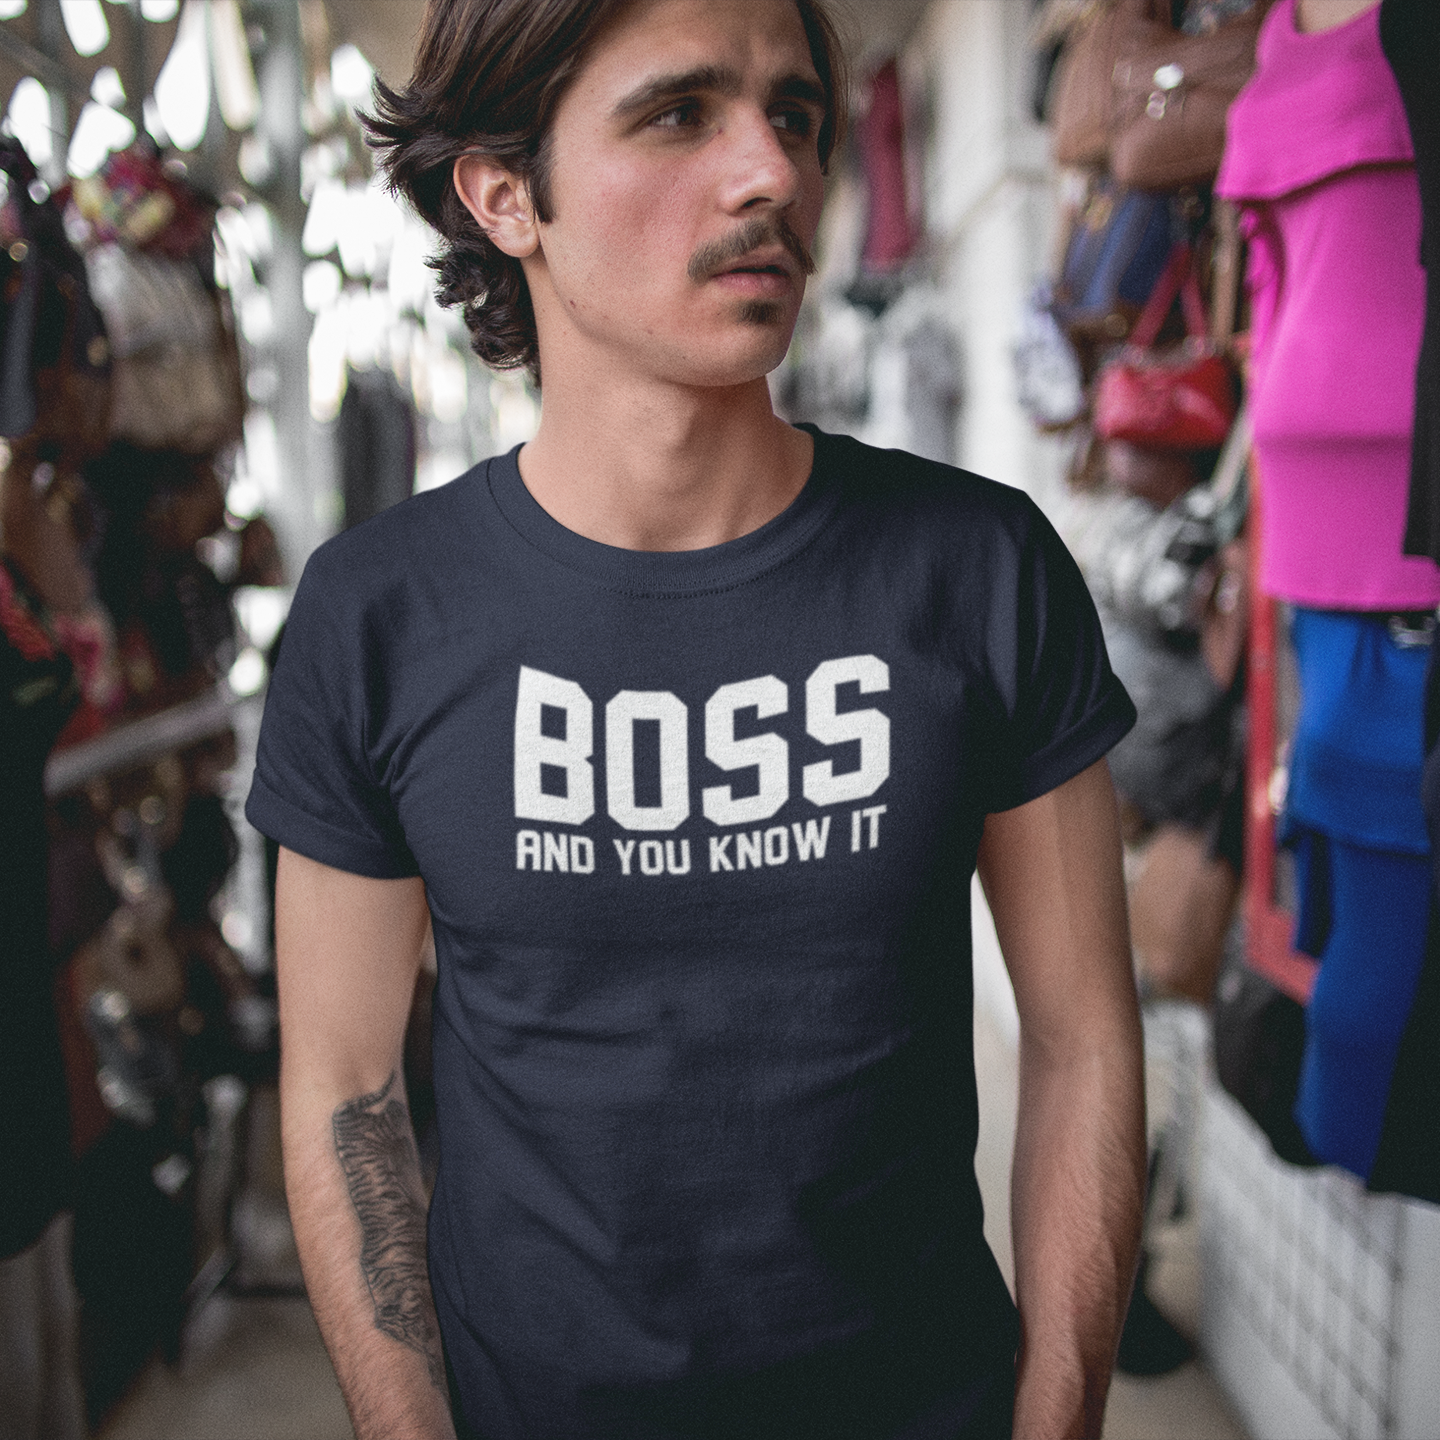 'Boss and you know it' volwassene shirt